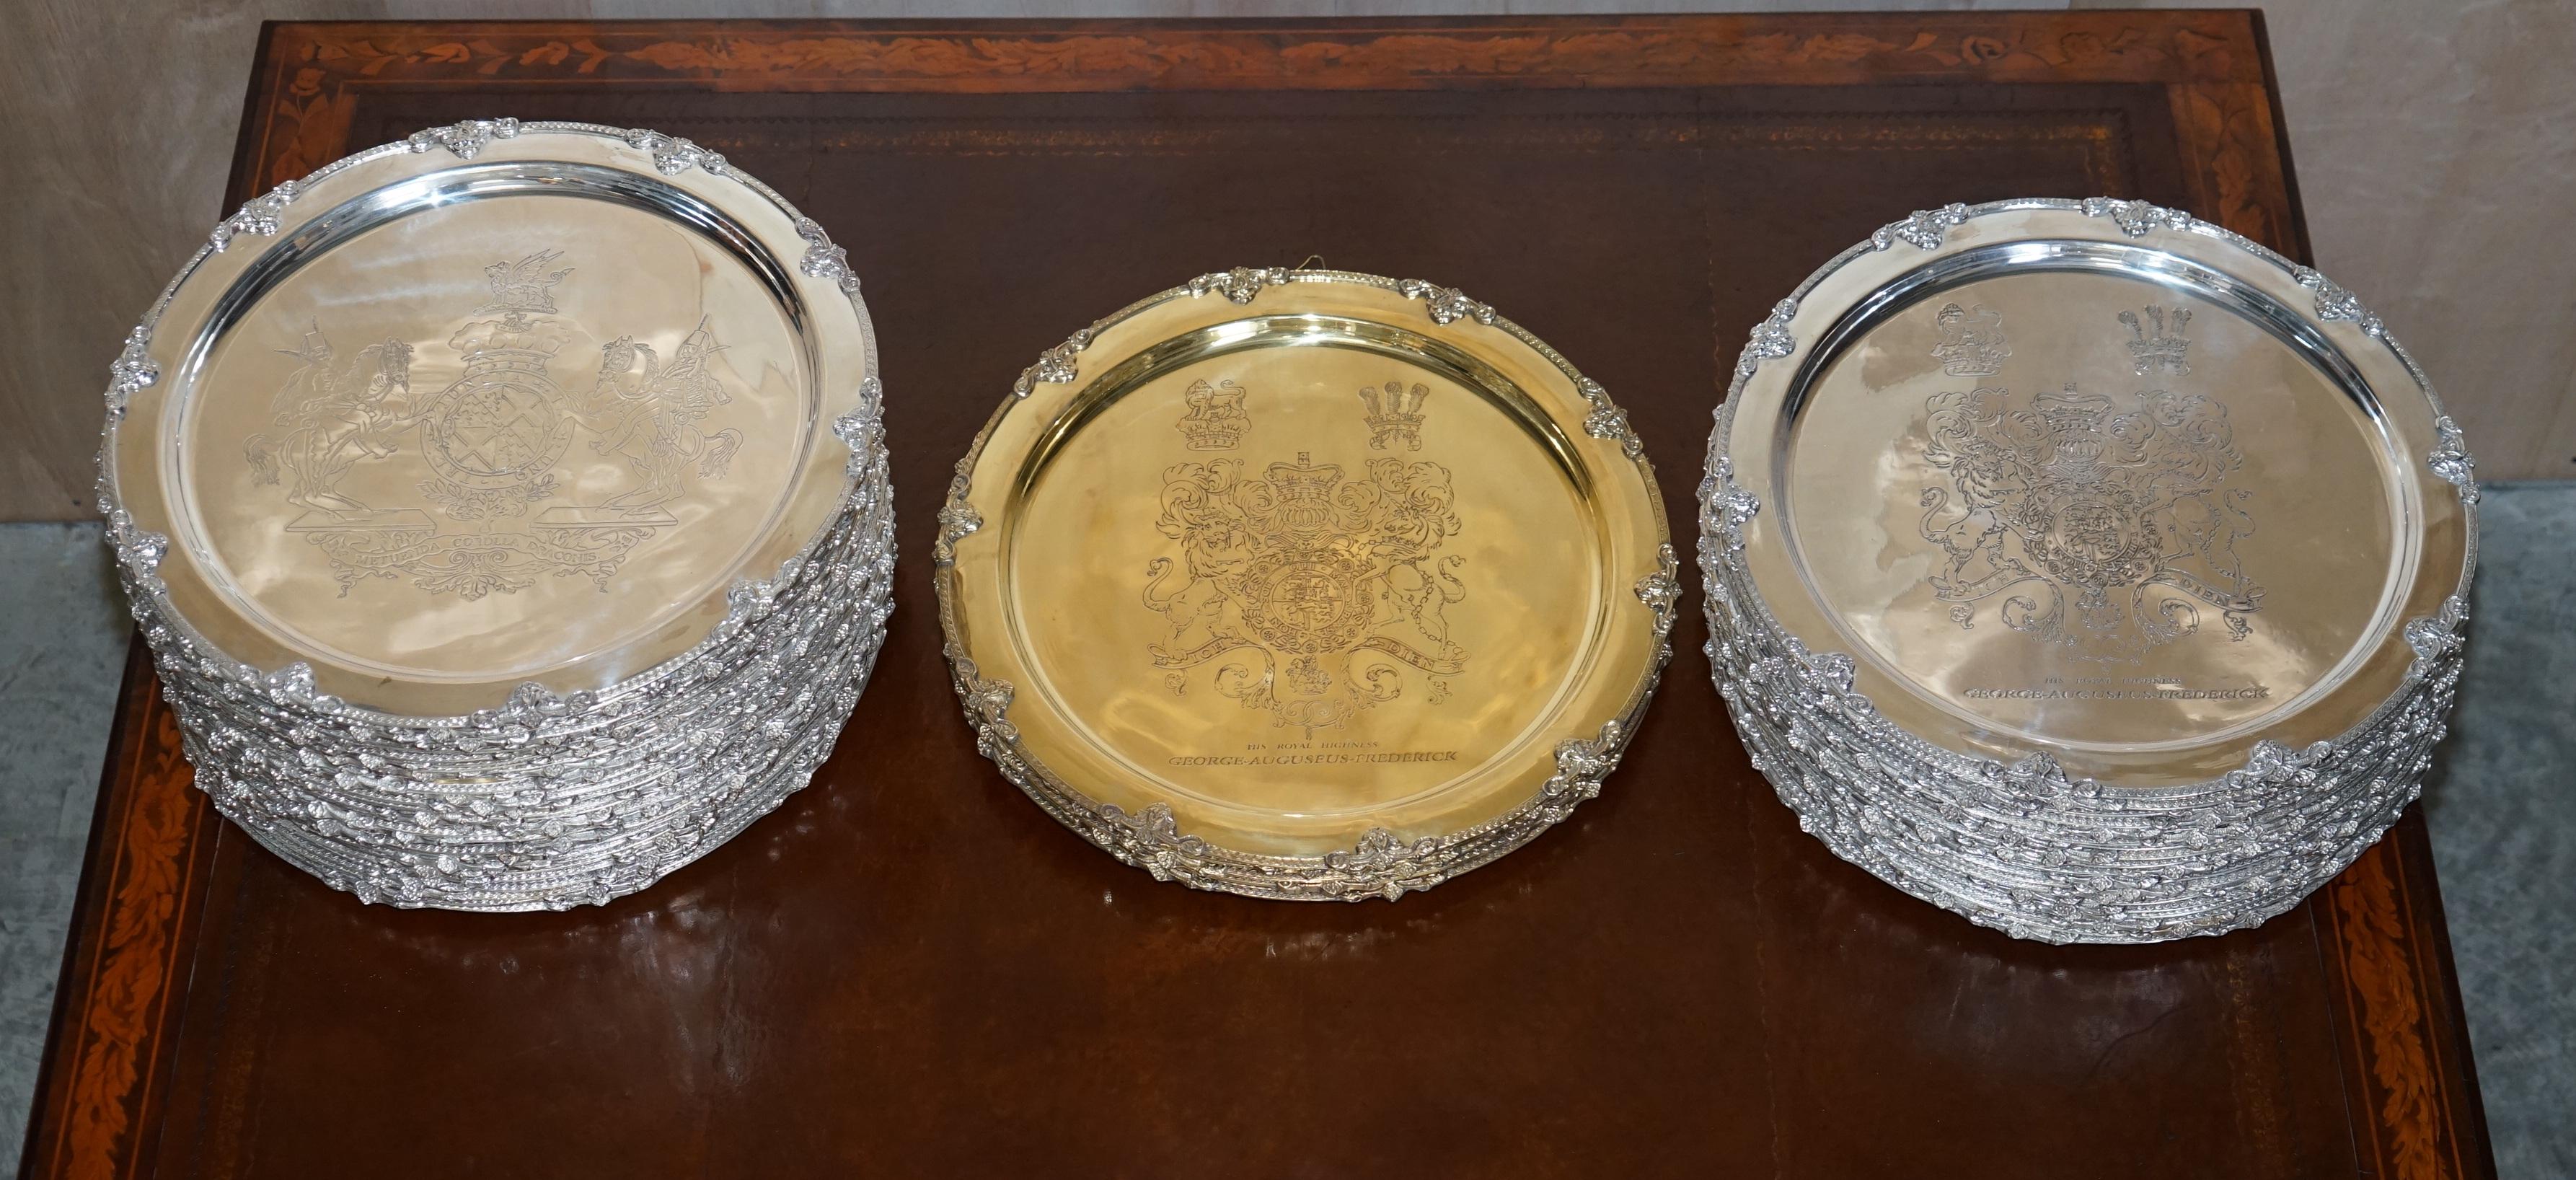 1 of 4 King George Auguseue Frederick Arms Gilt Sterling Silver Plated Trays For Sale 8